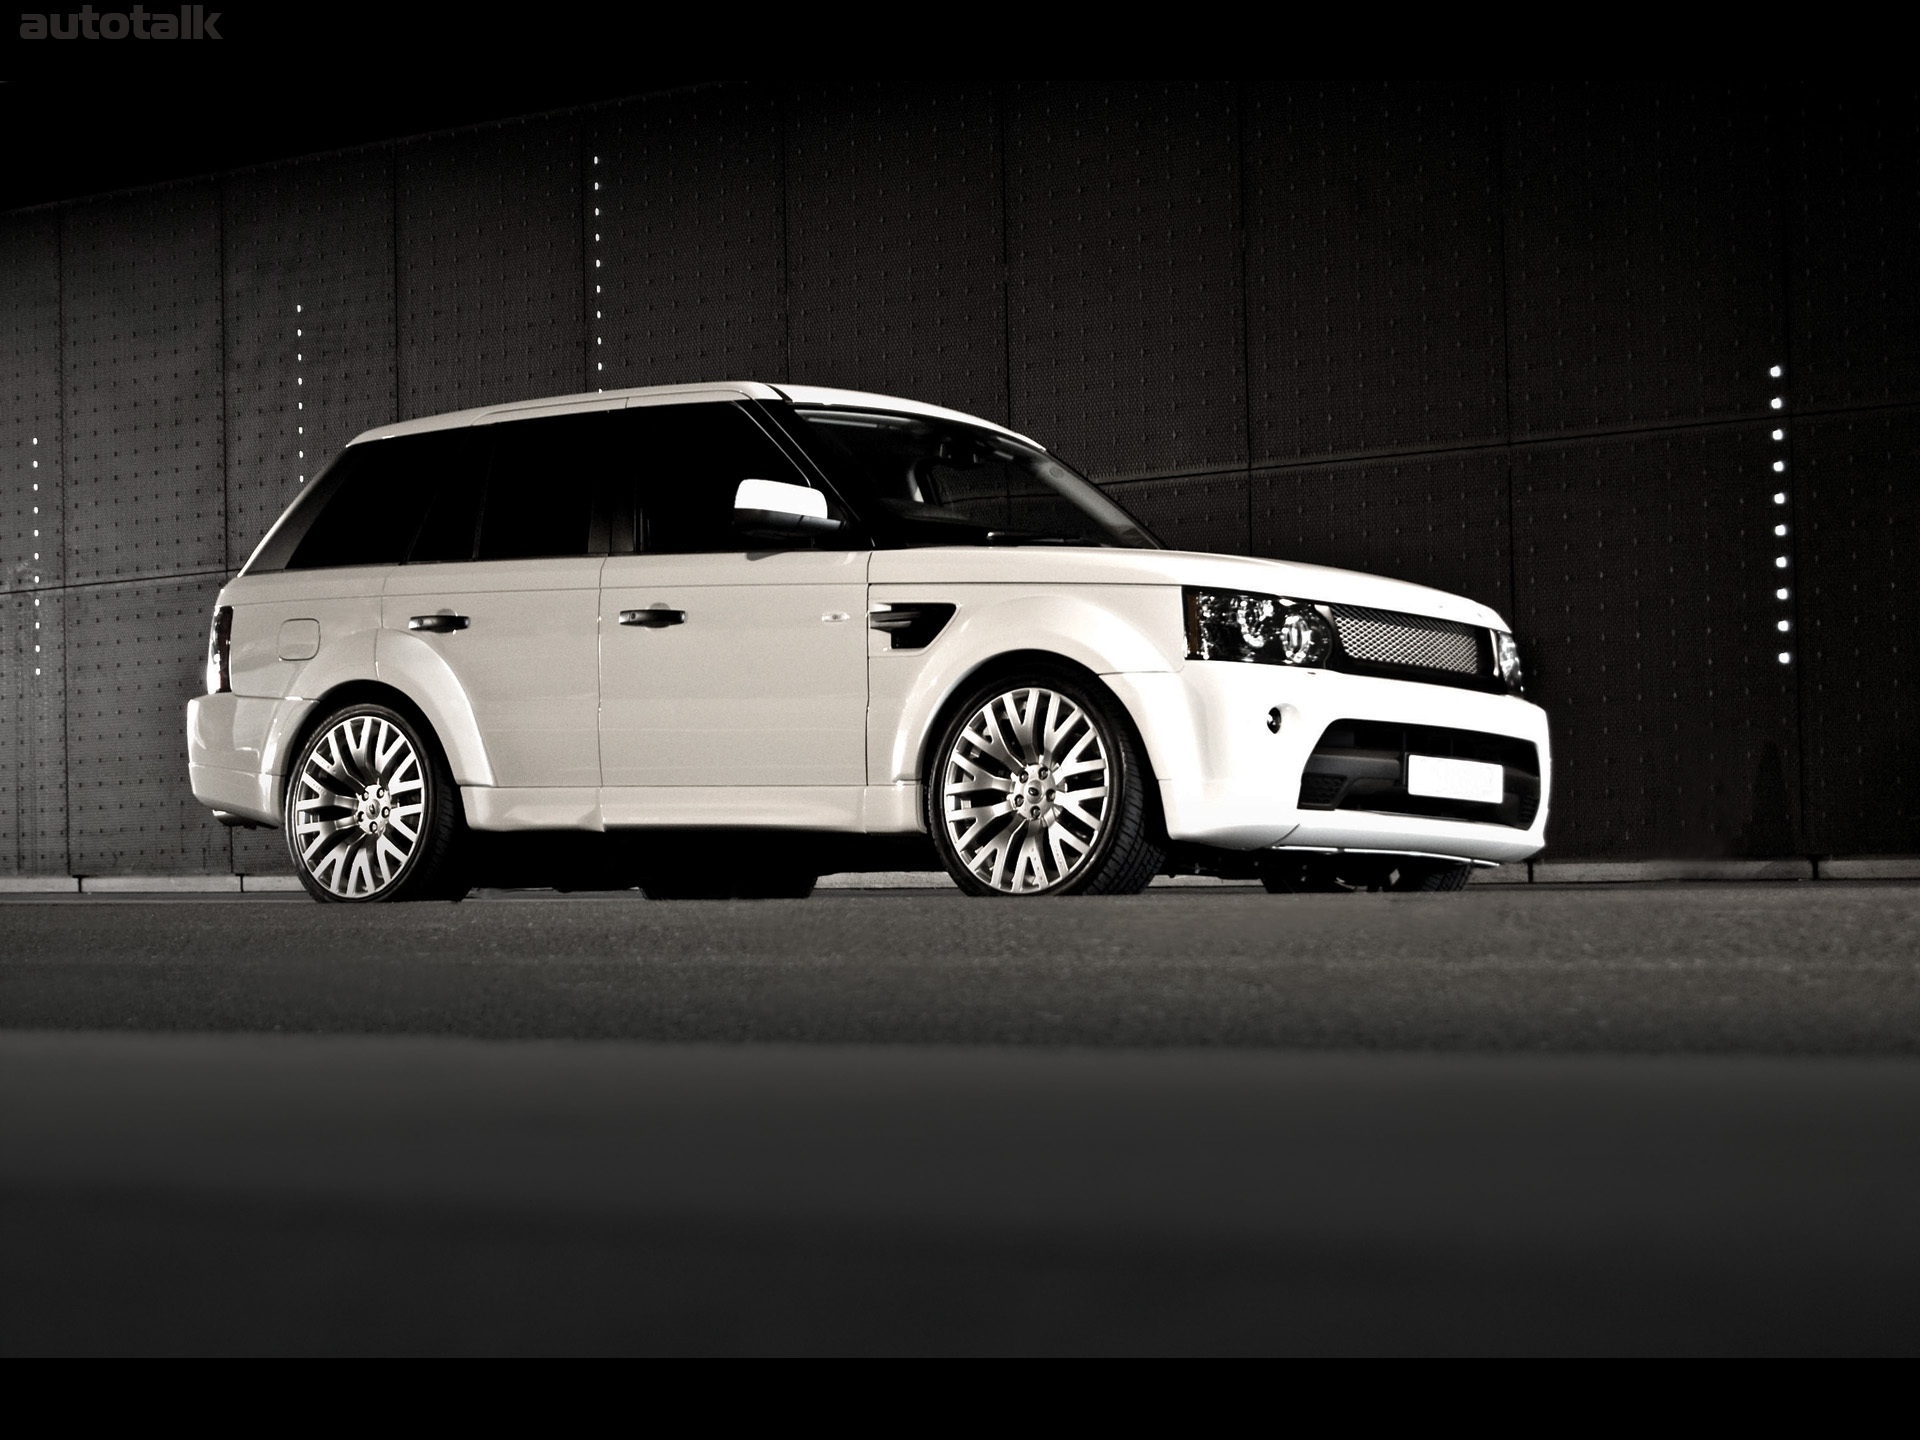 2010 Project Kahn Land Rover Range Rover Sport RS600 Autobiography